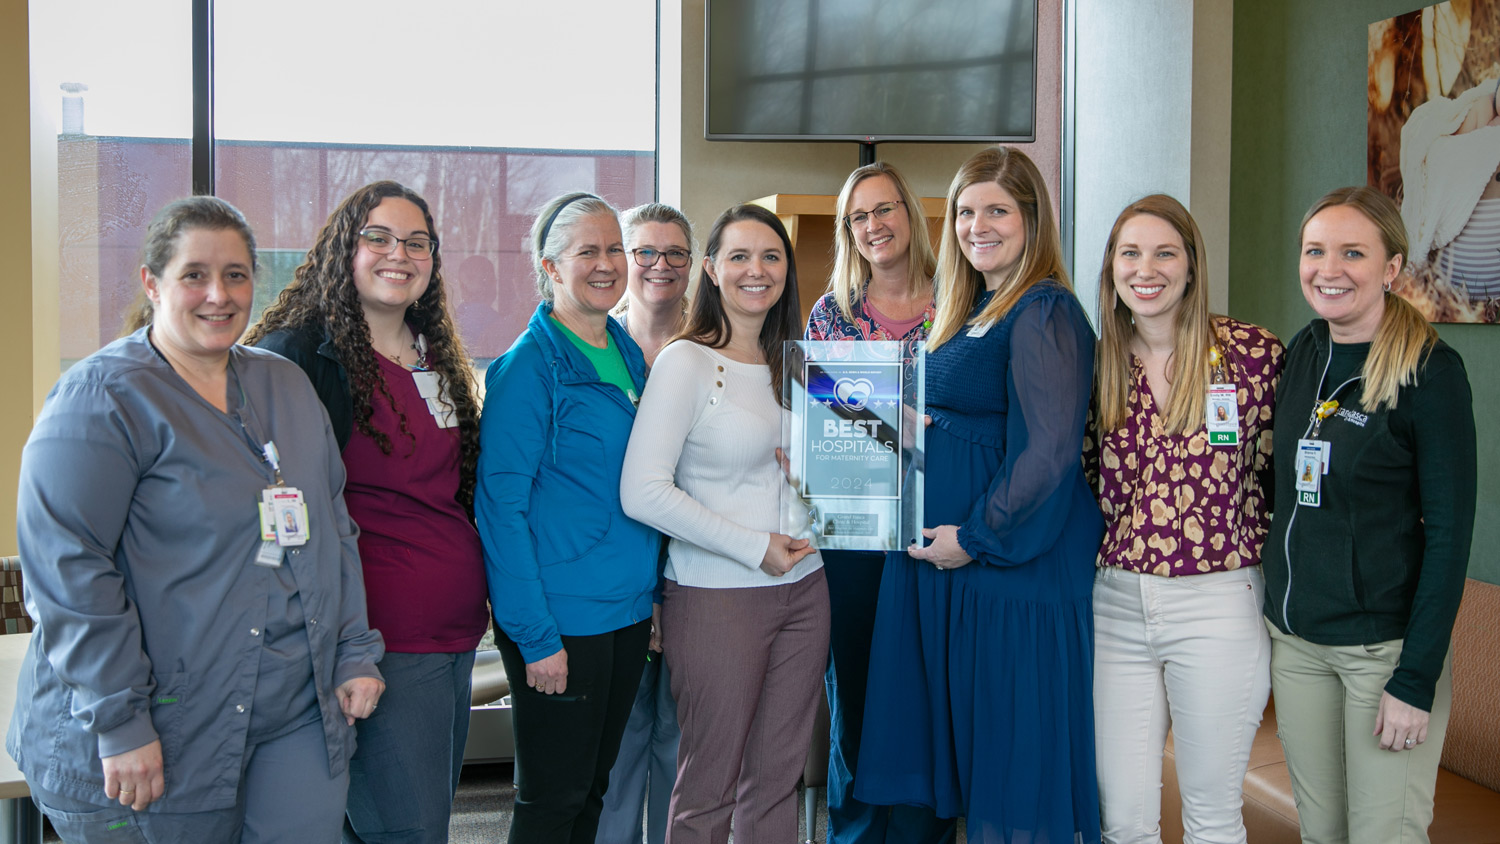 Grand Itasca staff pose with the Best Hospital Maternity Care Award